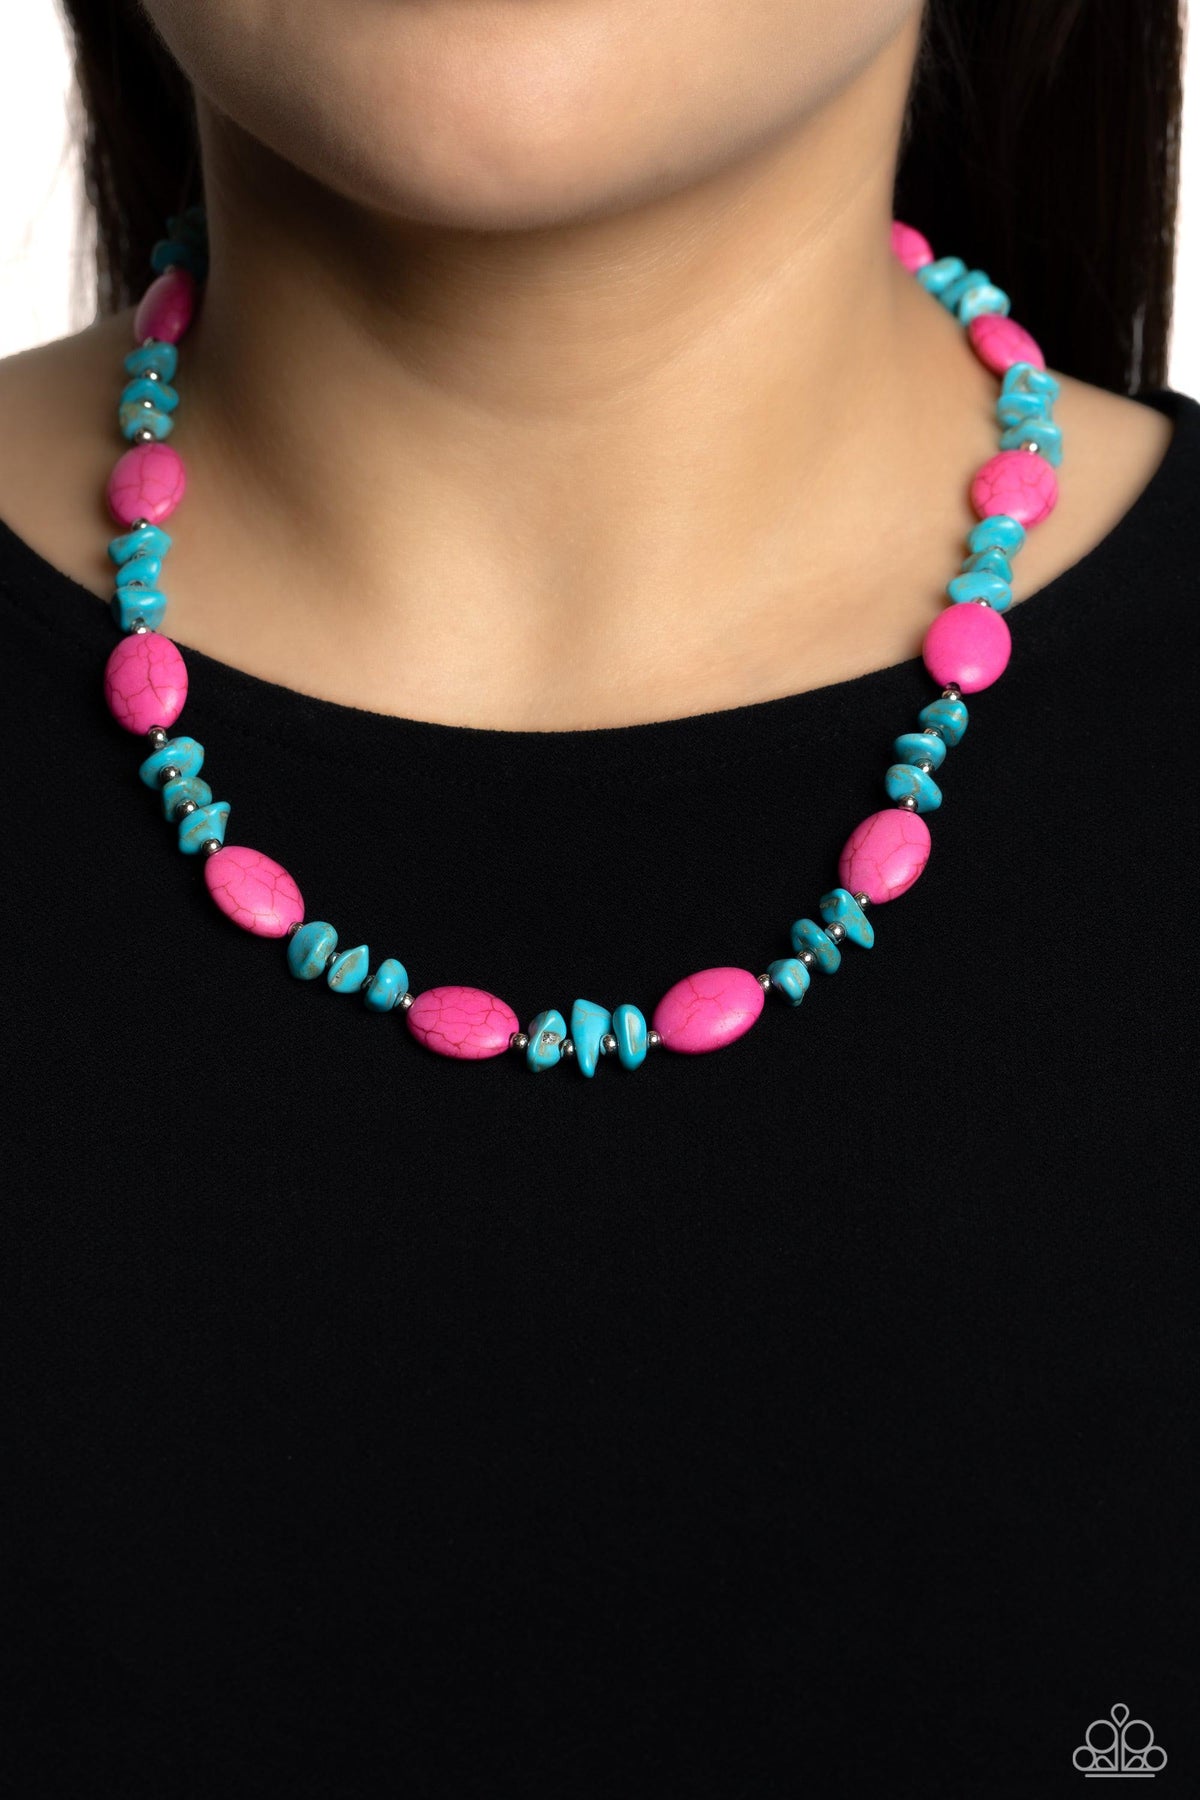 Stone Age Showcase Pink &amp; Turquoise Stone Necklace-on model - CarasShop.com - $5 Jewelry by Cara Jewels